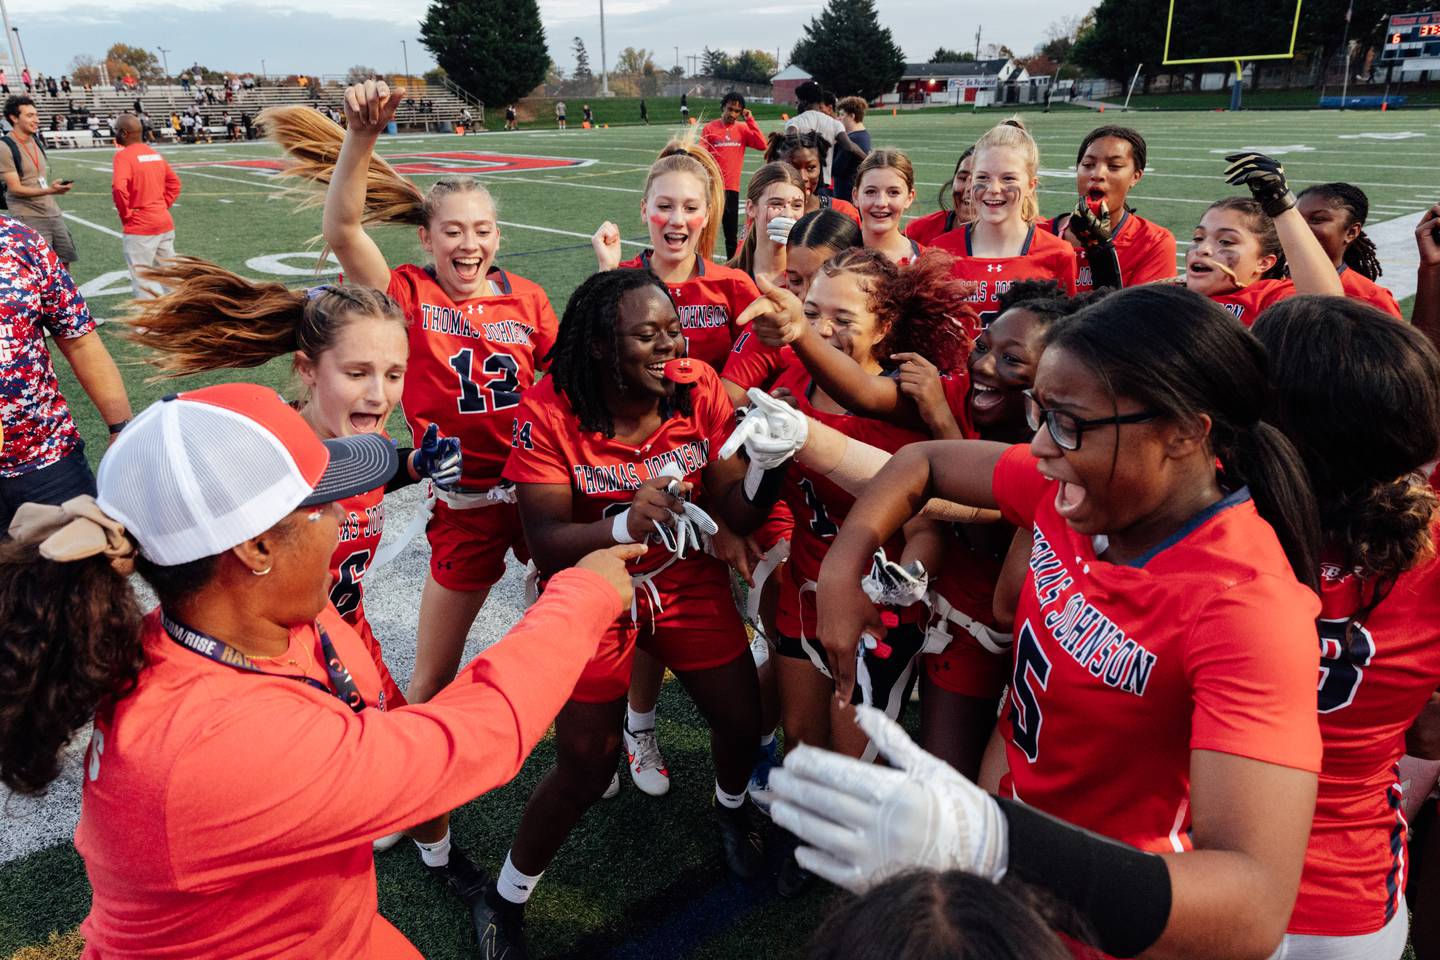 The Thomas Johnson Patriots celebrate after winning the last regular season game against the Frederick County Cadets, and clinching a postseason appearance in the first girls flag football season offered by Frederick County Public Schools in partnership and the Baltimore Ravens, at Thomas Johnson High School, on Thursday, Oct. 26, 2023 in Frederick, MD. (Wesley Lapointe / for the Baltimore Banner)